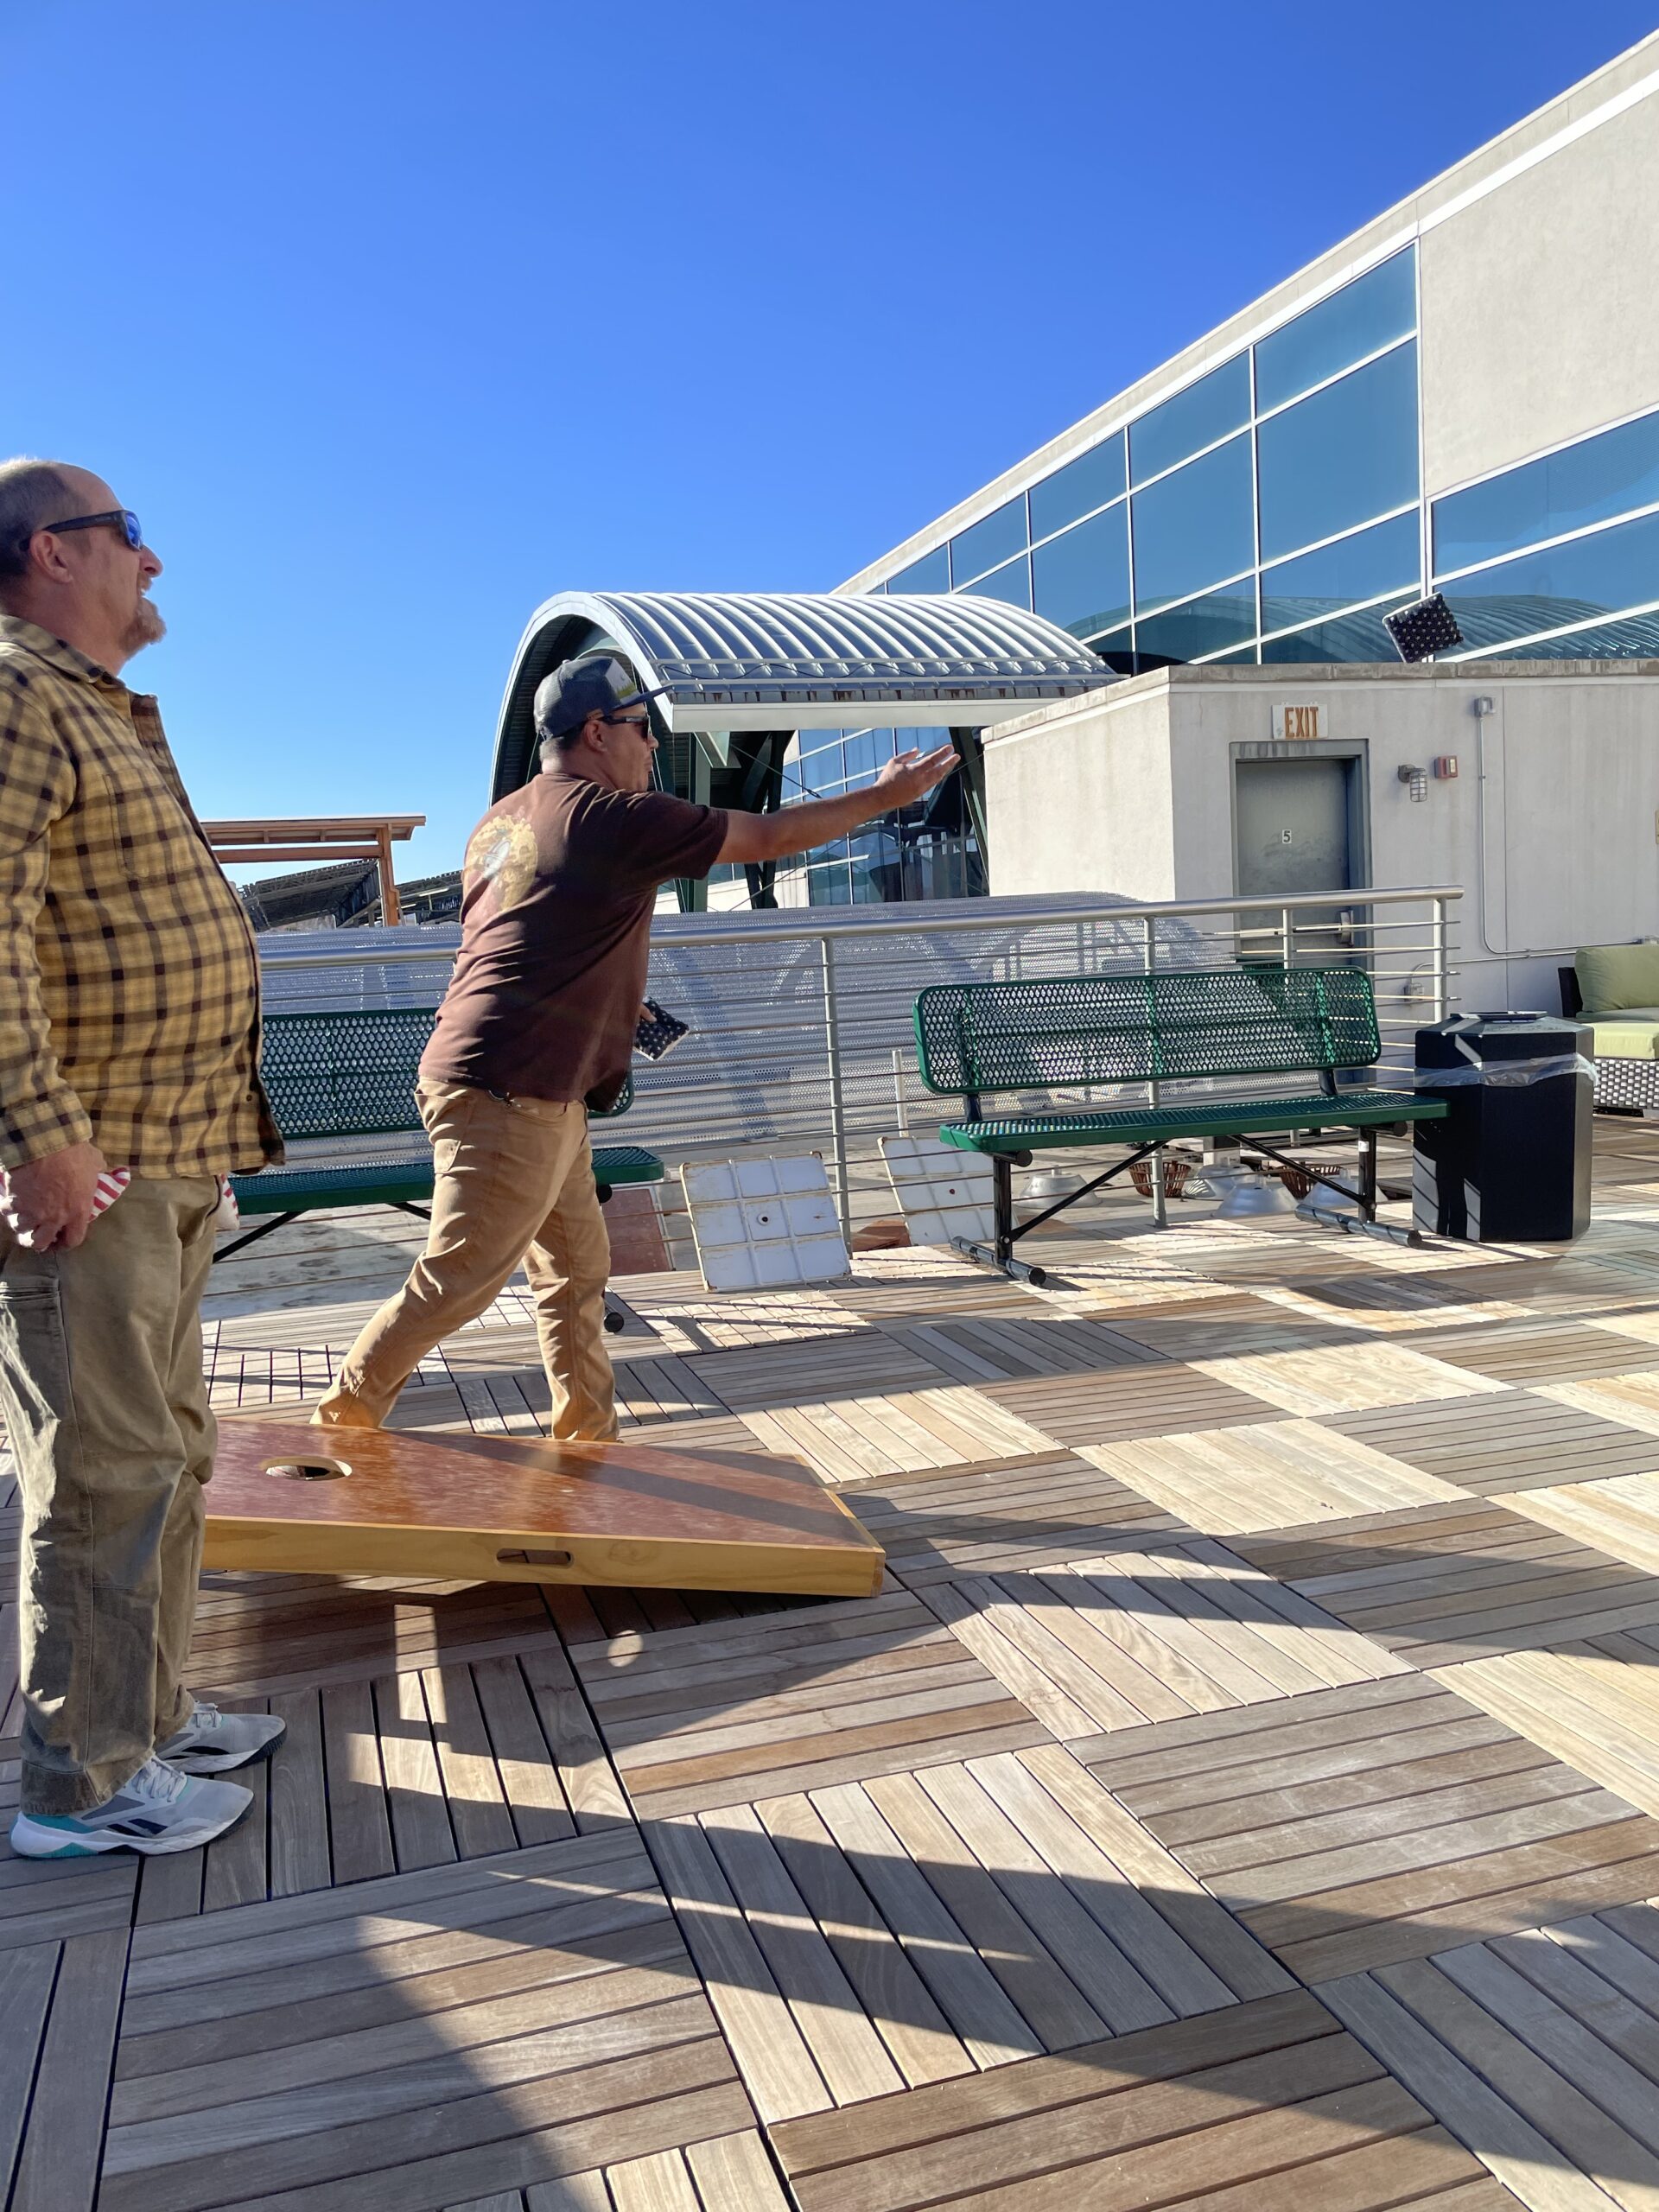 Two men playing frisbee on a deck.